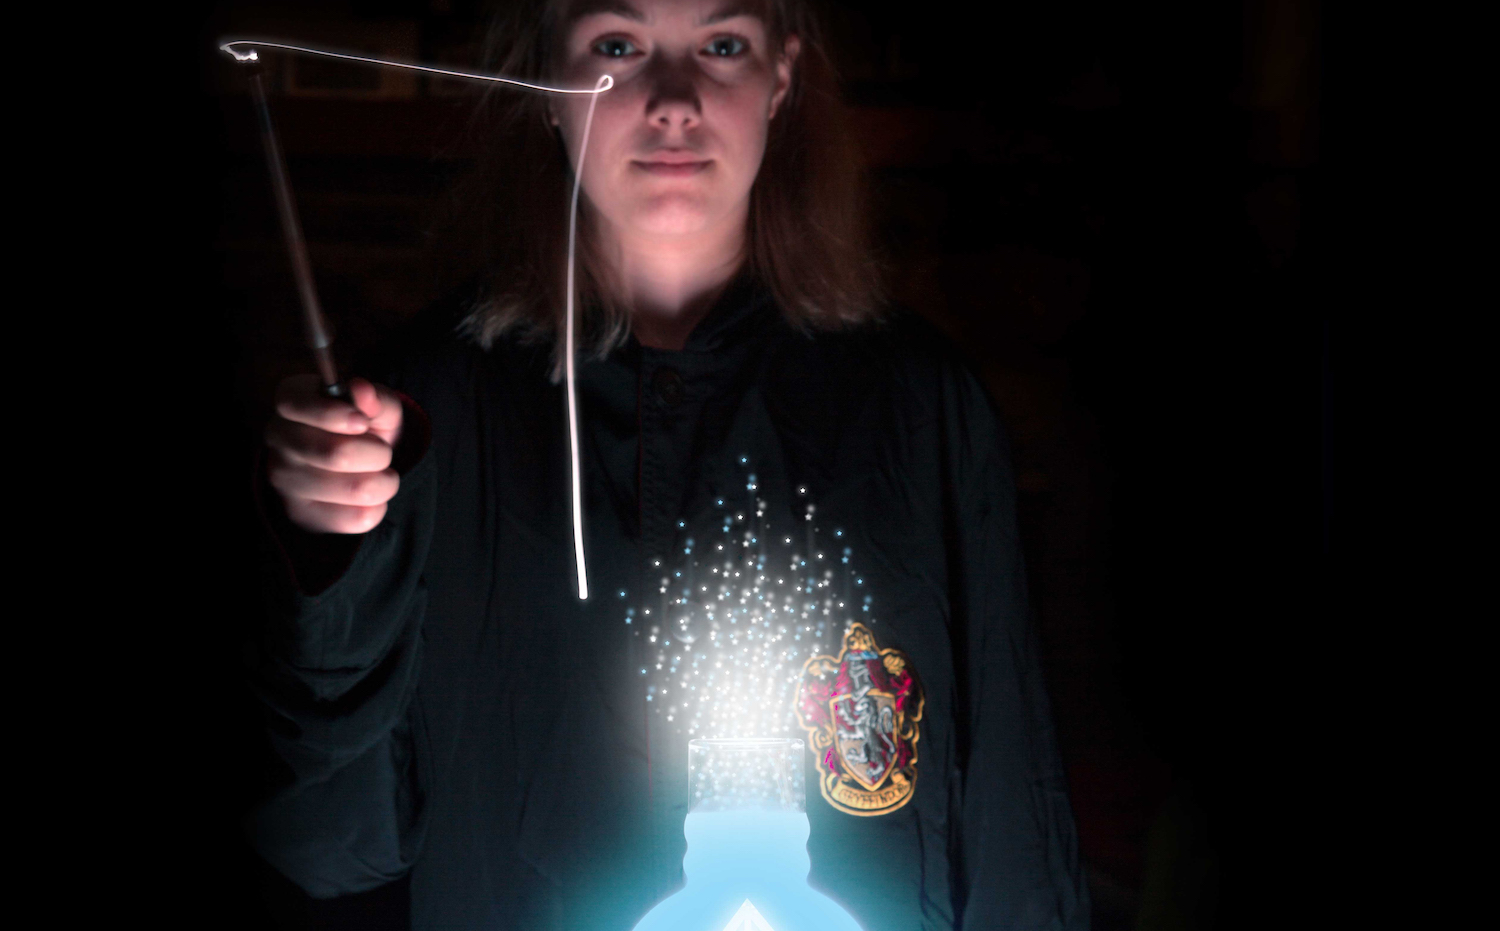 Turn on a Lamp with a Gesture-Controlled Harry Potter Wand